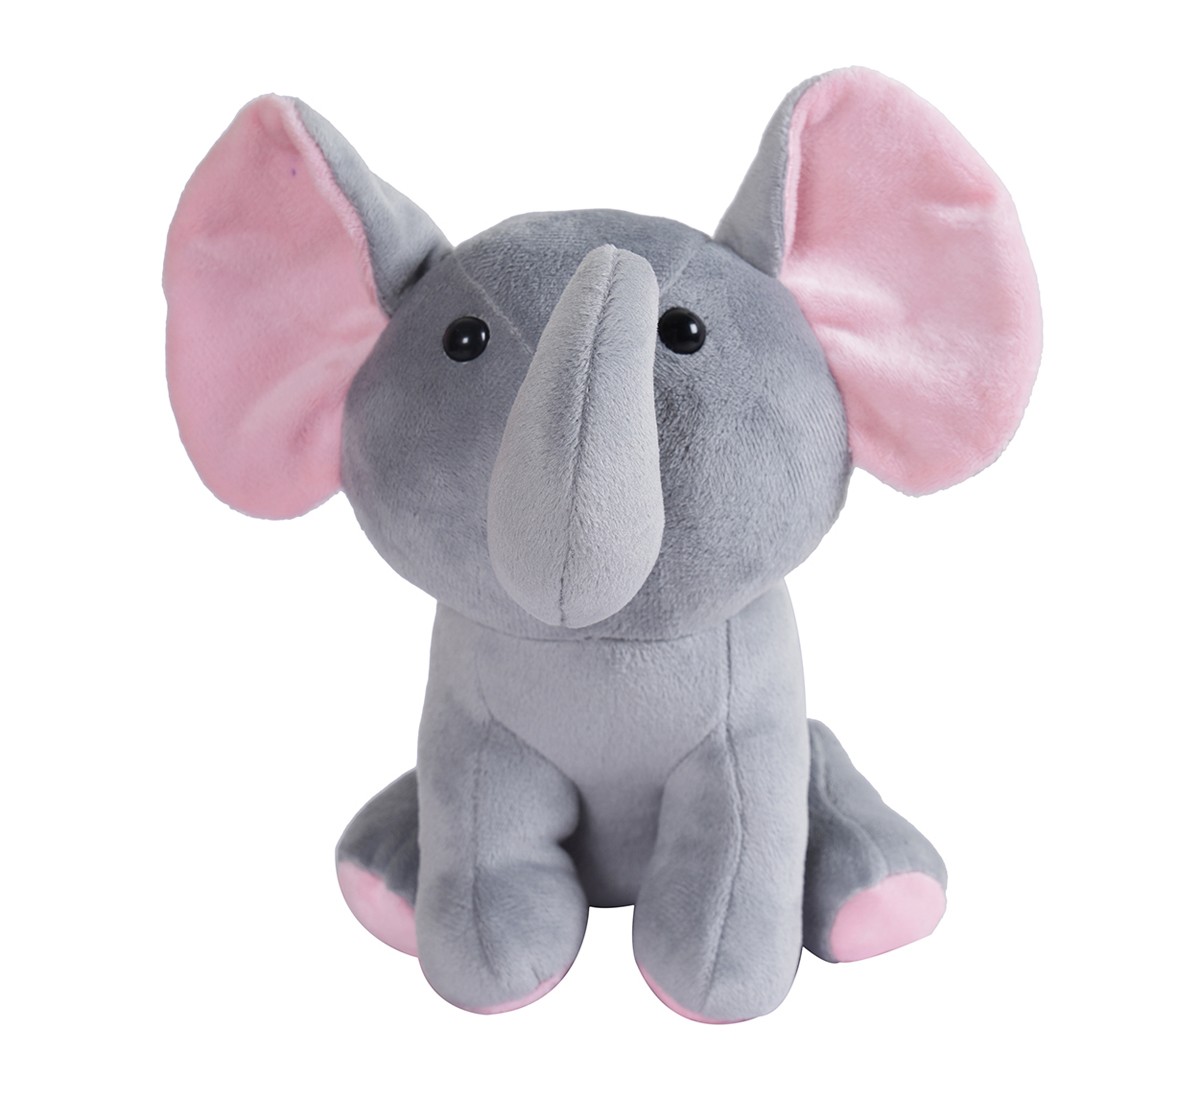 Furrendz Friendly Eli 10" Plush Grey for Kids 1 Year and Above